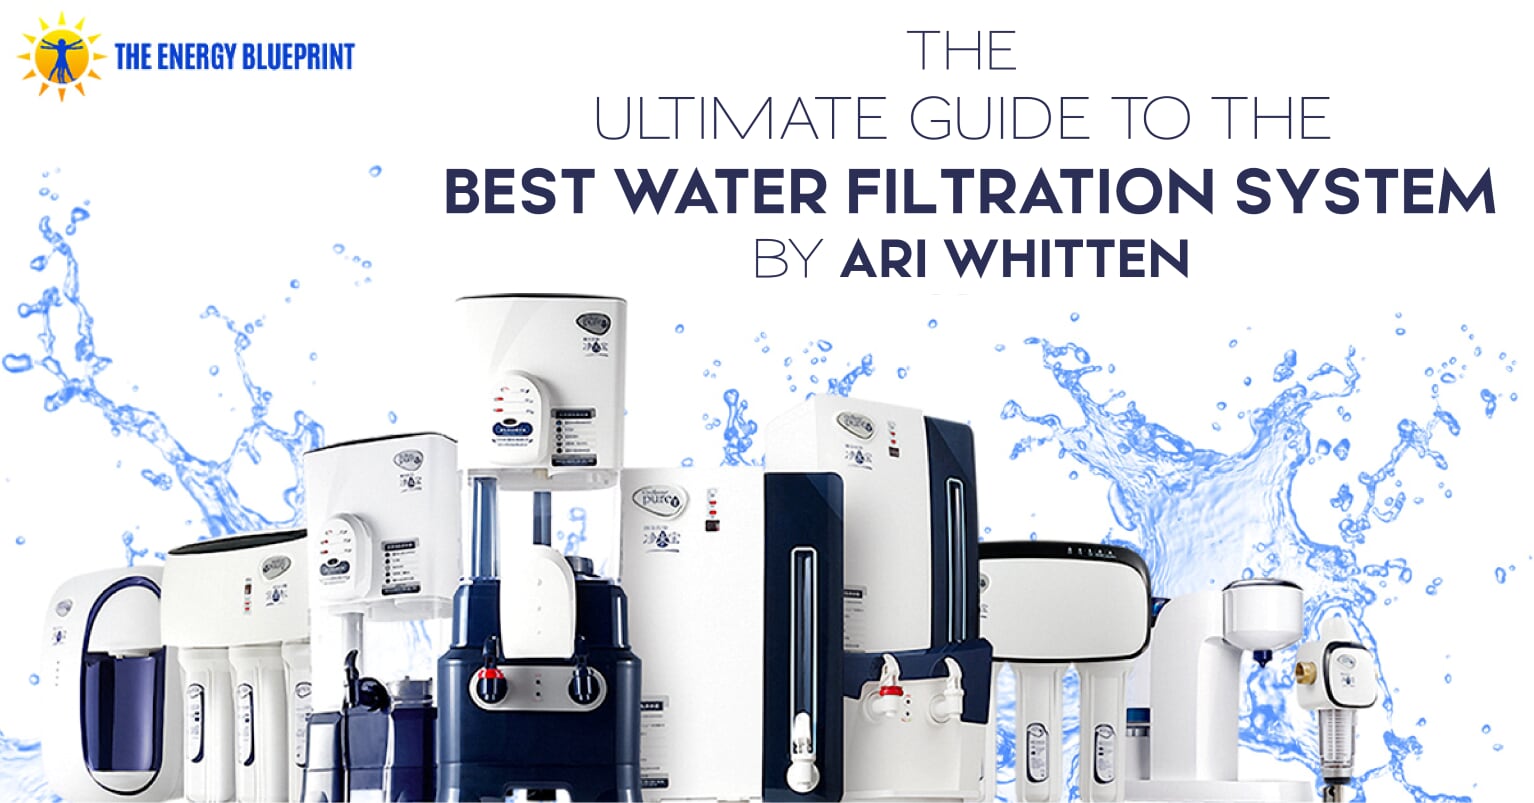 The Best Water Filtration System With Ari Whitten